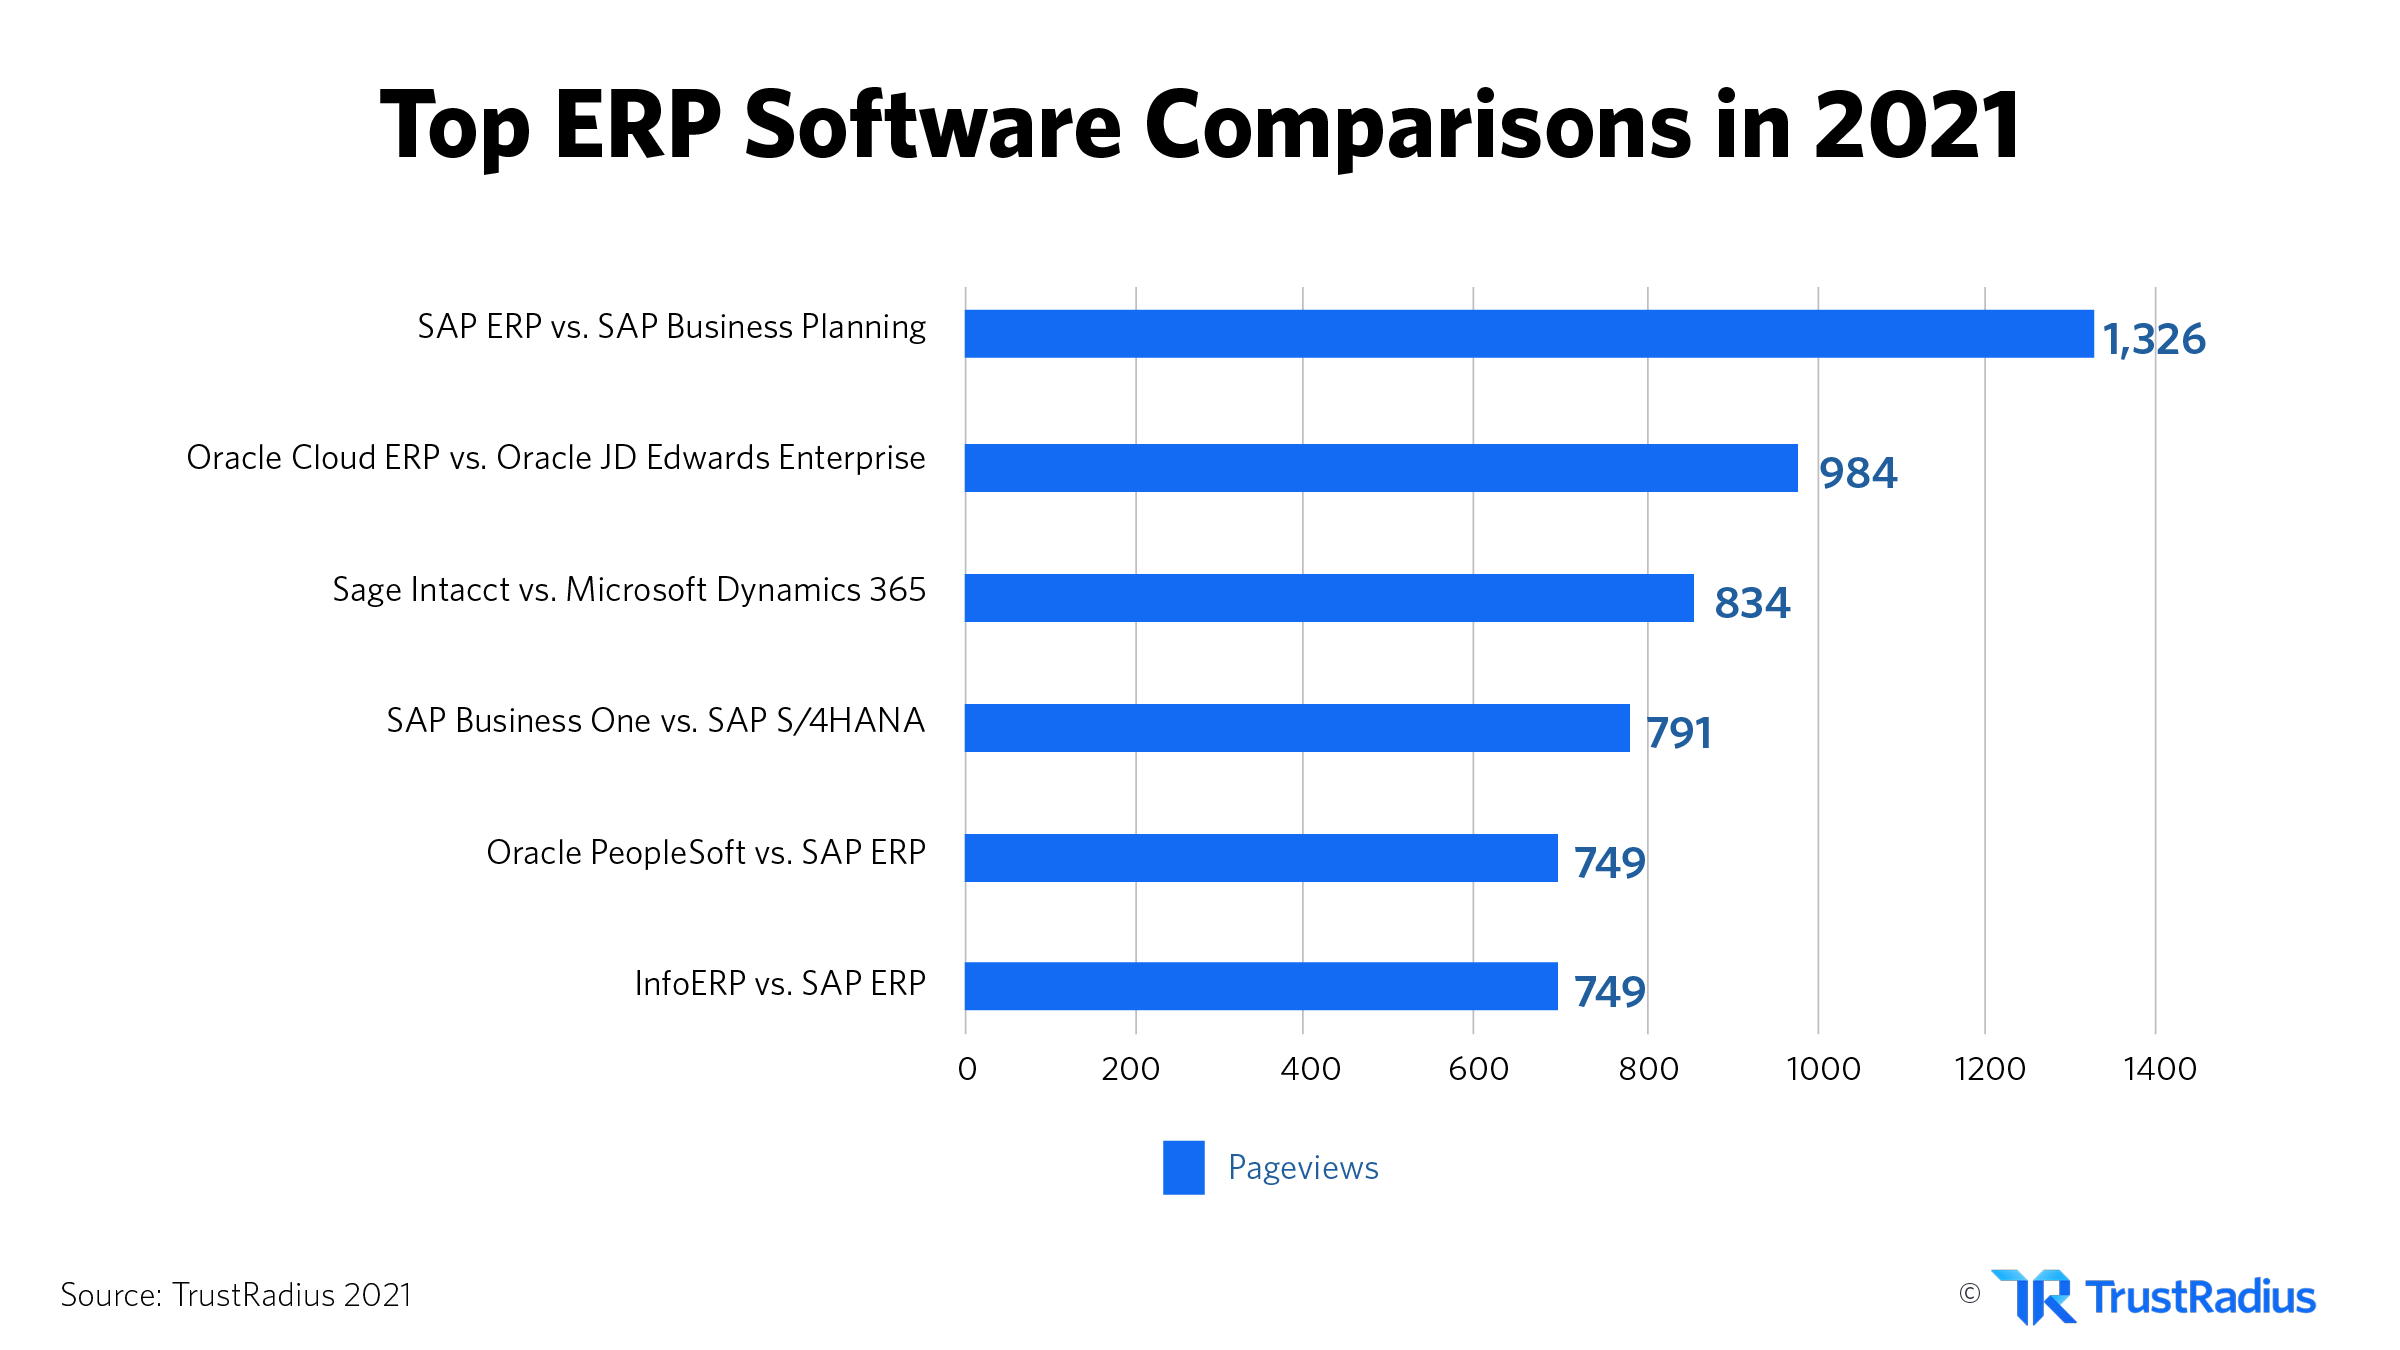 Top ERP software comparisons in 2021